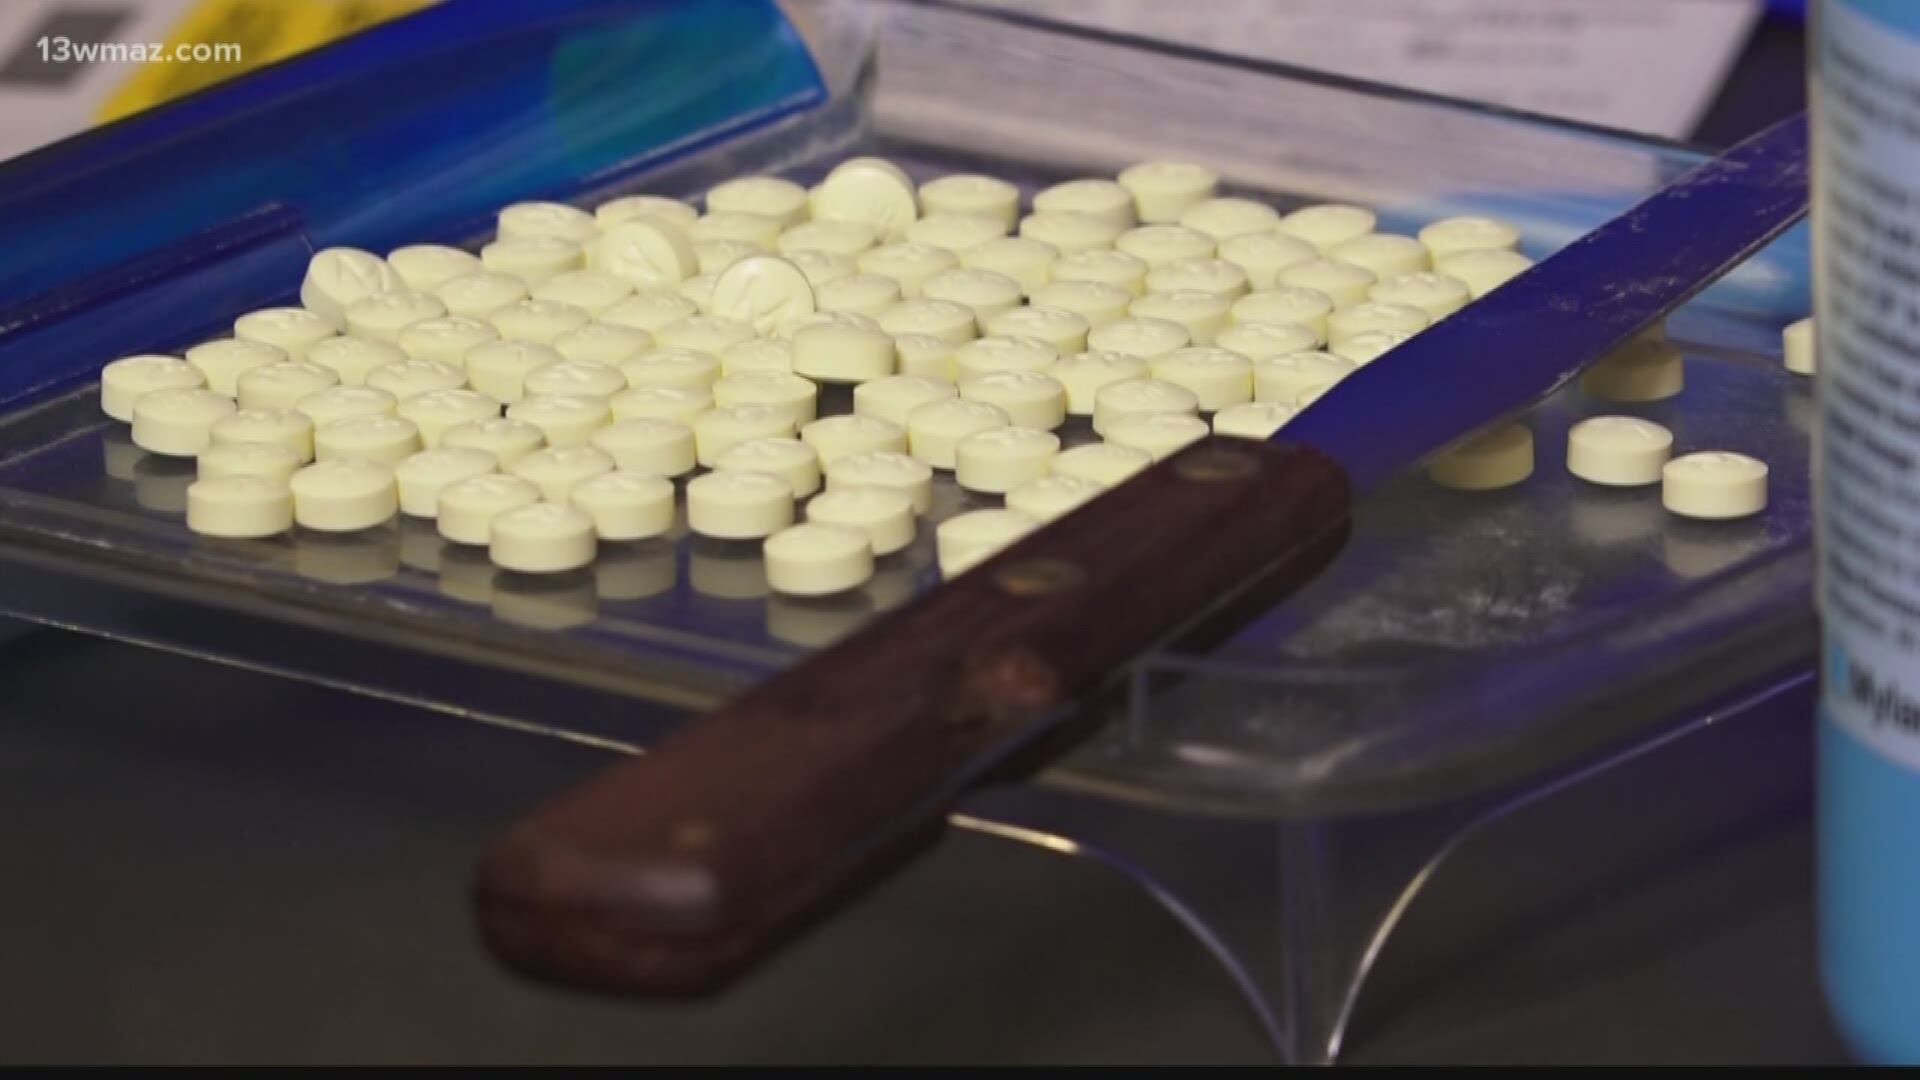 Every day in the United States, according to the CDC, 46 people die from prescription opioid overdoses. A church in Warner Robins wants to change that. Sarah Hammond tells us why First Baptist Church wants to educate the community and stop addiction before it starts.